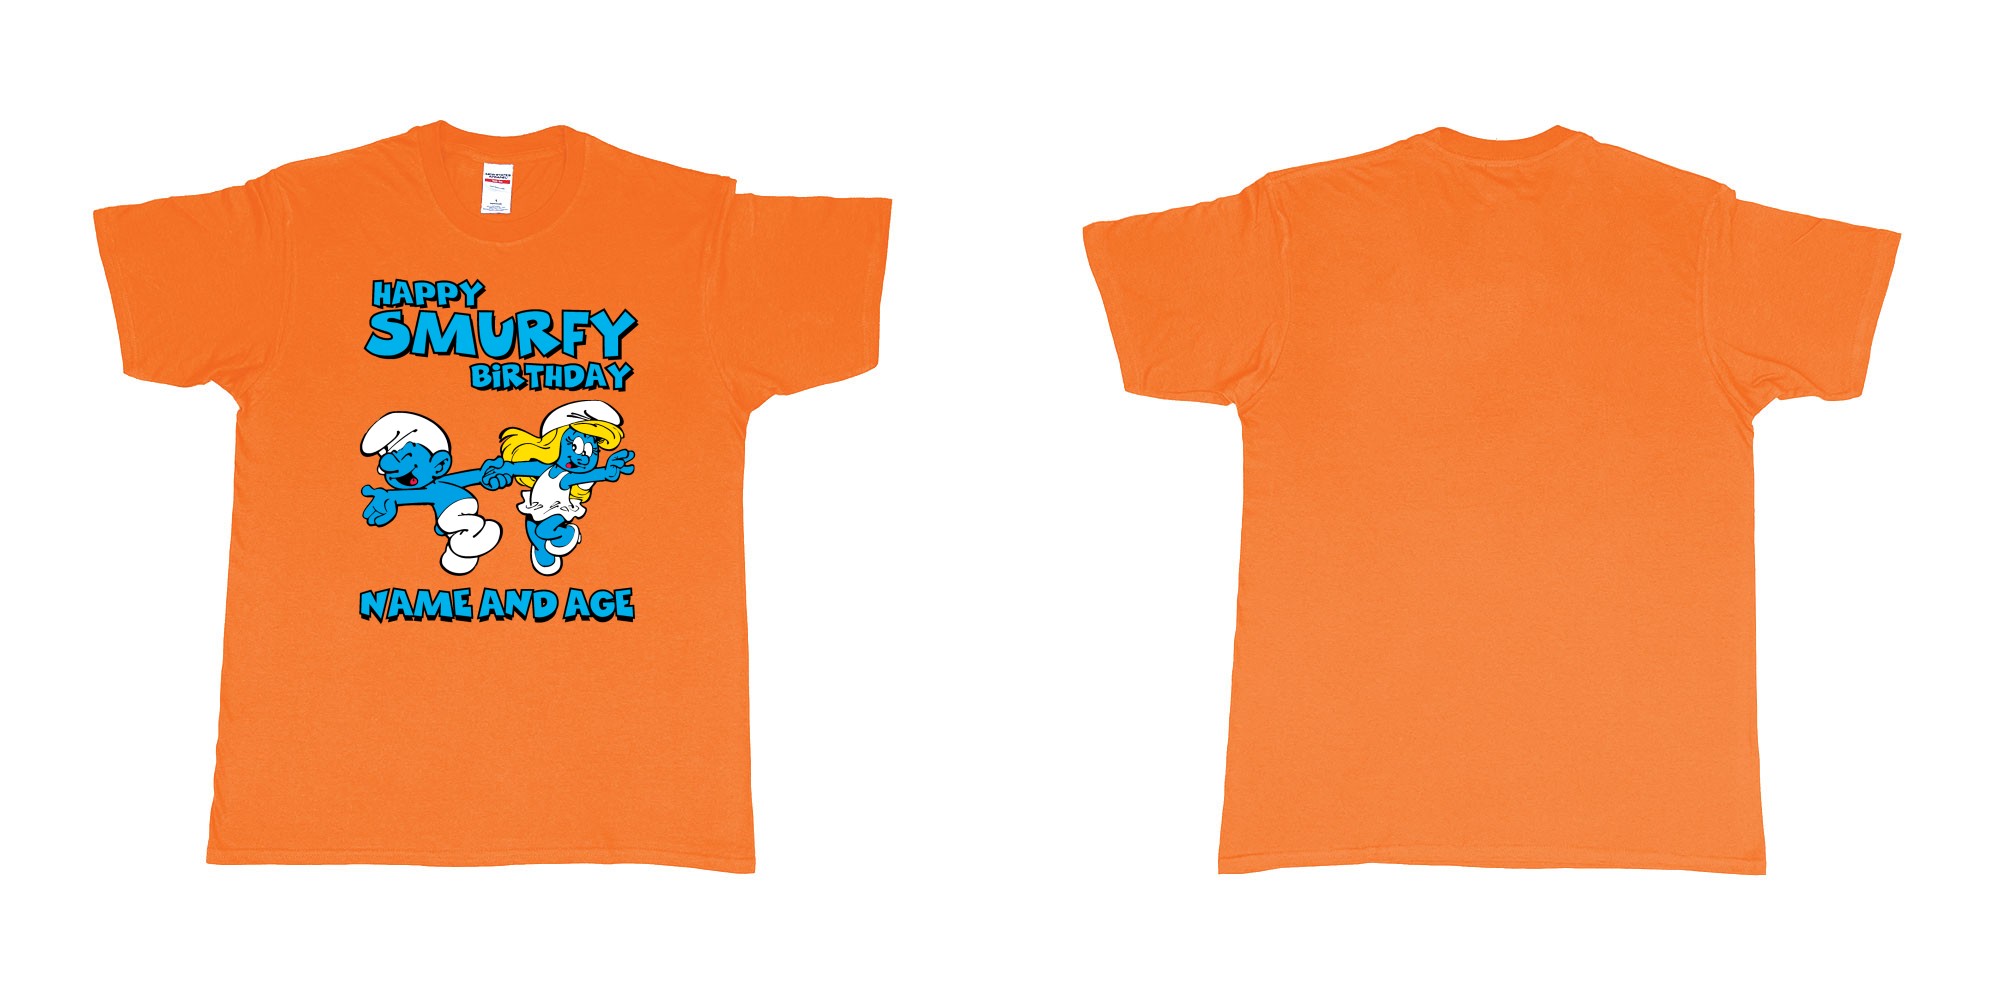 Custom tshirt design happy smurfy birthday in fabric color orange choice your own text made in Bali by The Pirate Way